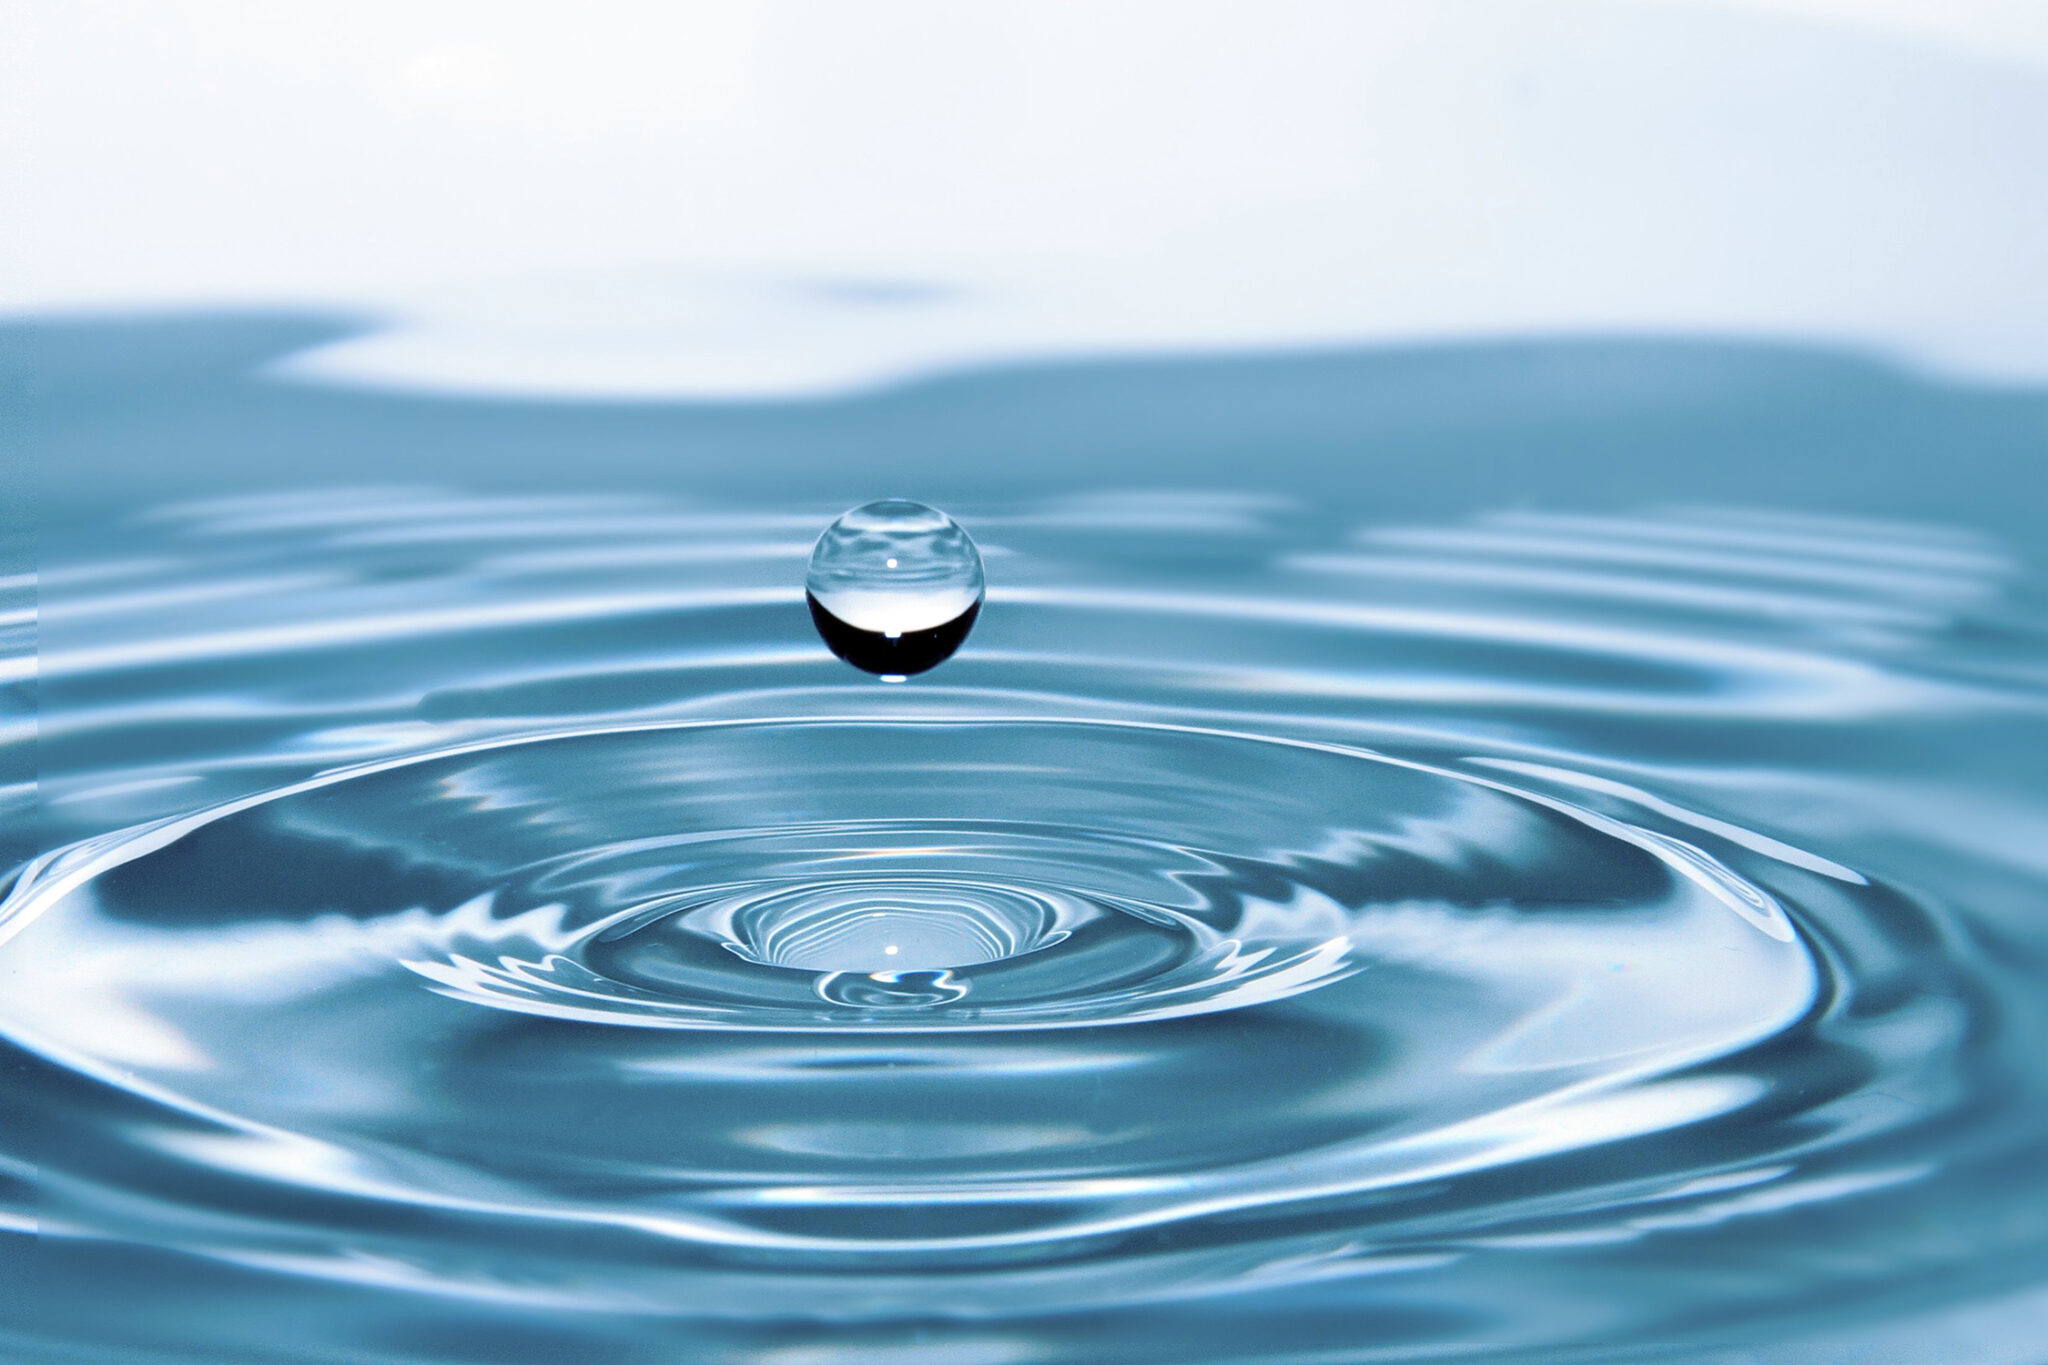 Stock image depicting a water droplet about to break the surface of an already rippled pool of water